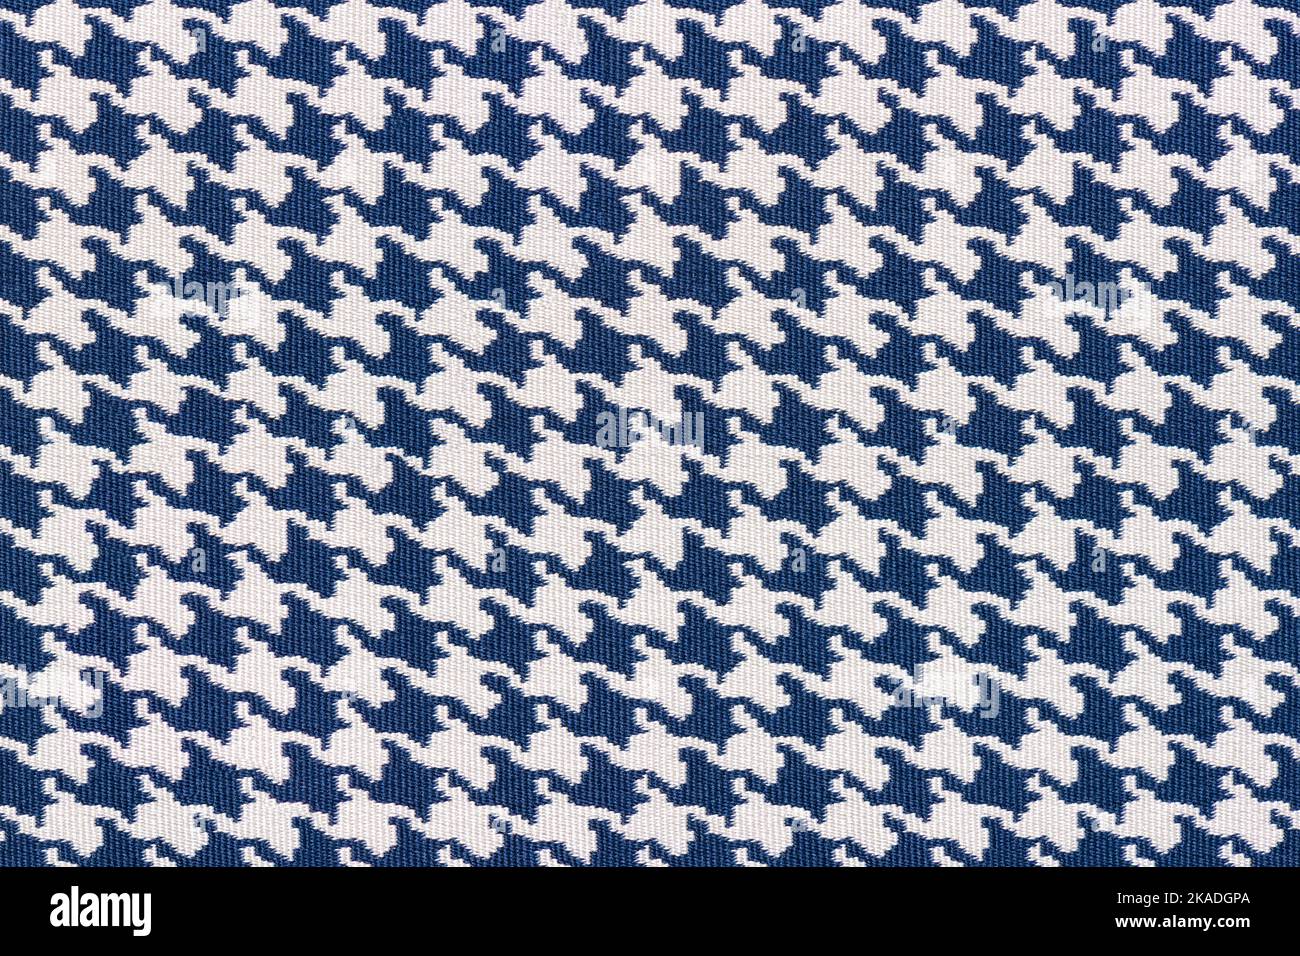 Houndstooth fabric pattern repeat blue white Stock Photo